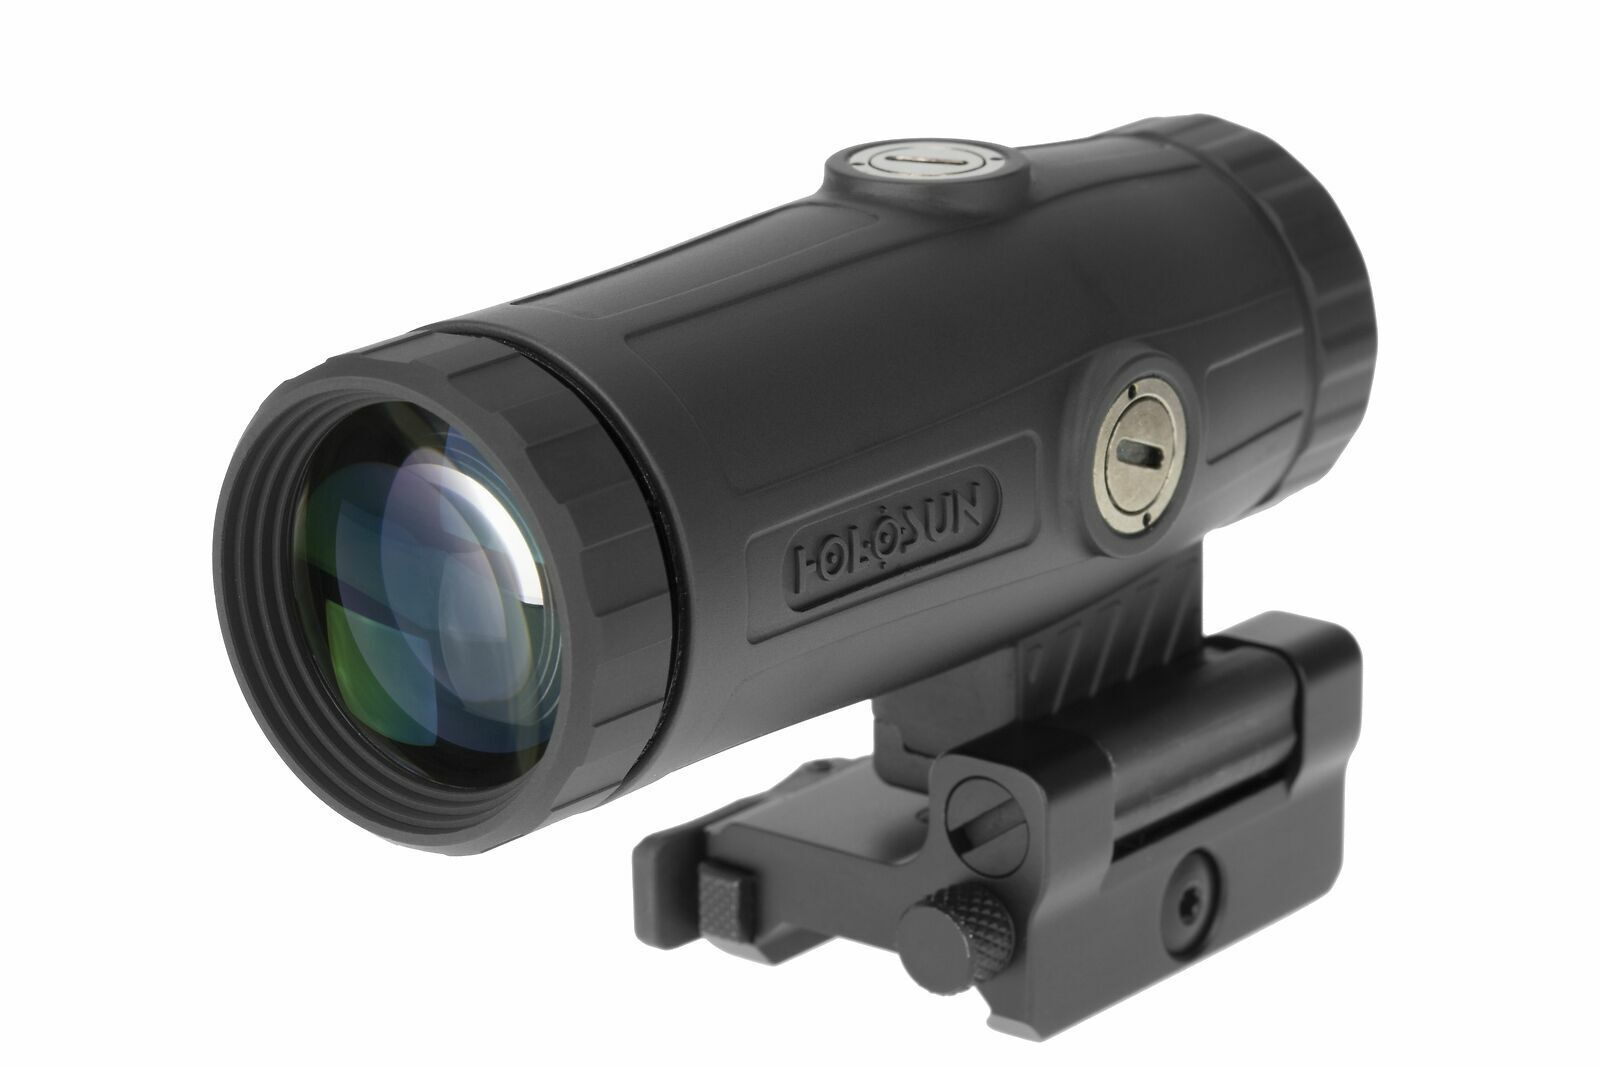 Holosun HM3X Red Dot Magnifier, 3X, Integrated QD Mount w/Optional Spacer, Black